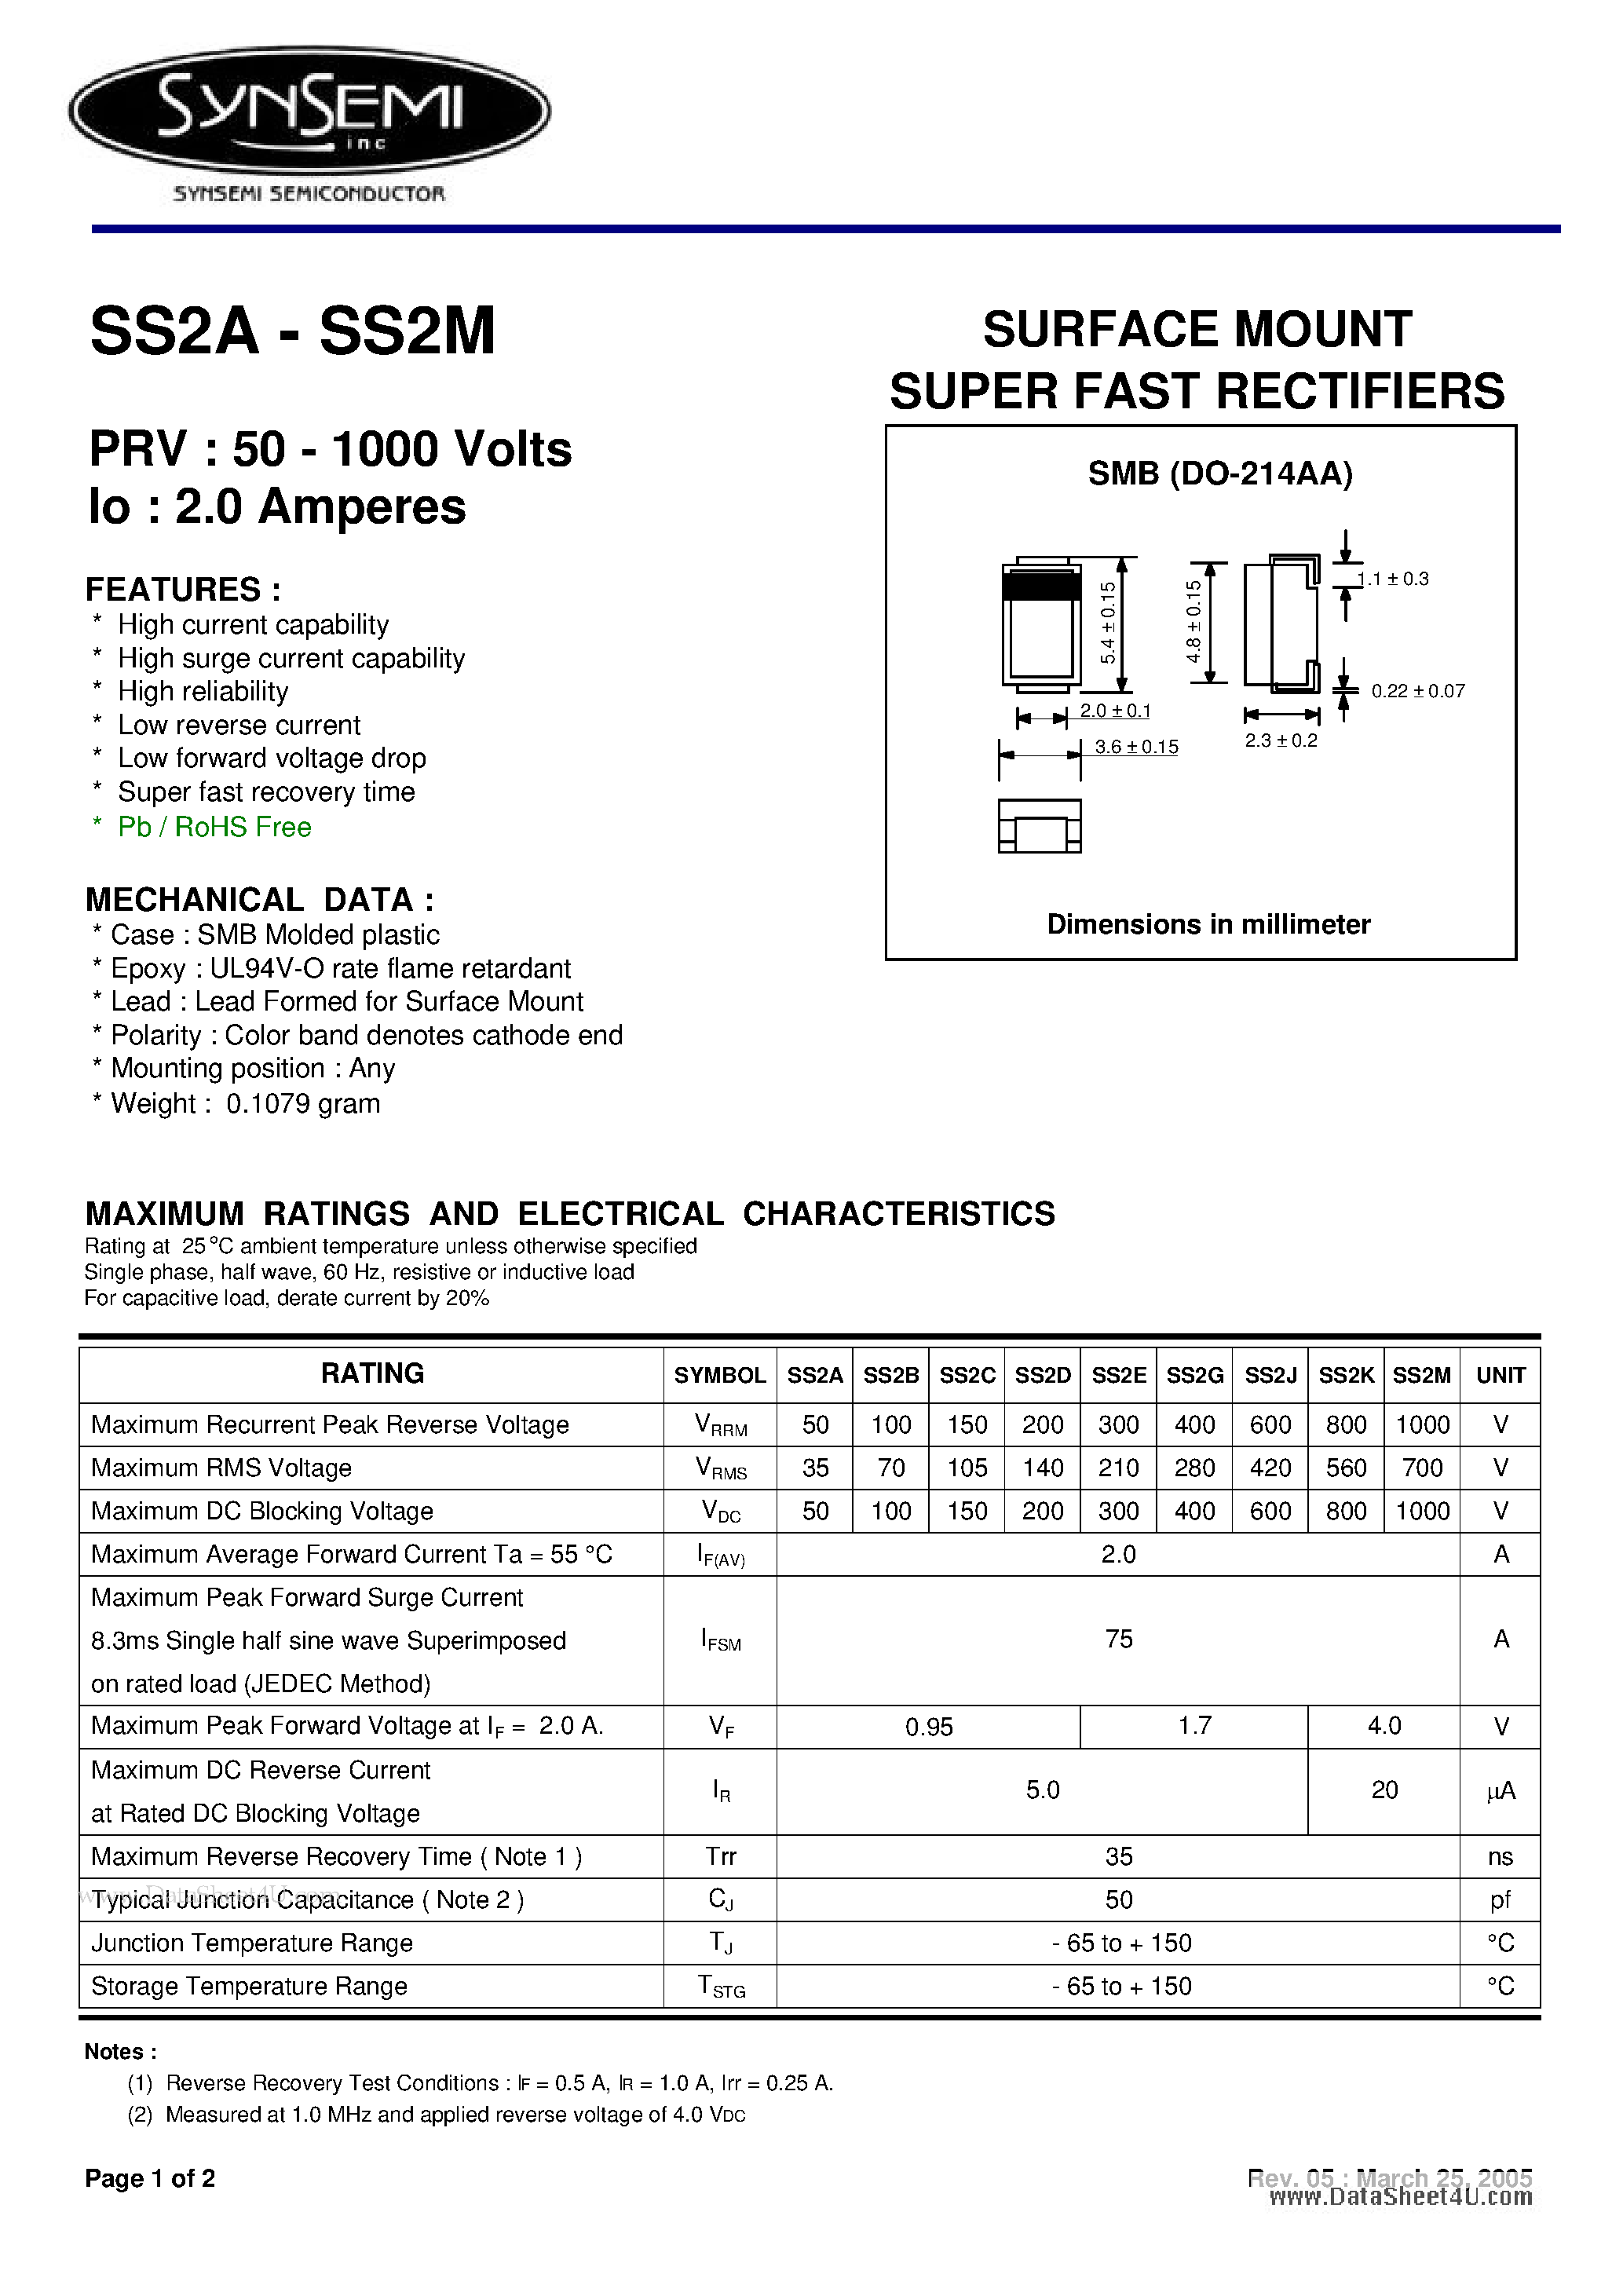 Даташит SS2A - SURFACE MOUNT SUPER FAST RECTIFIERS страница 1